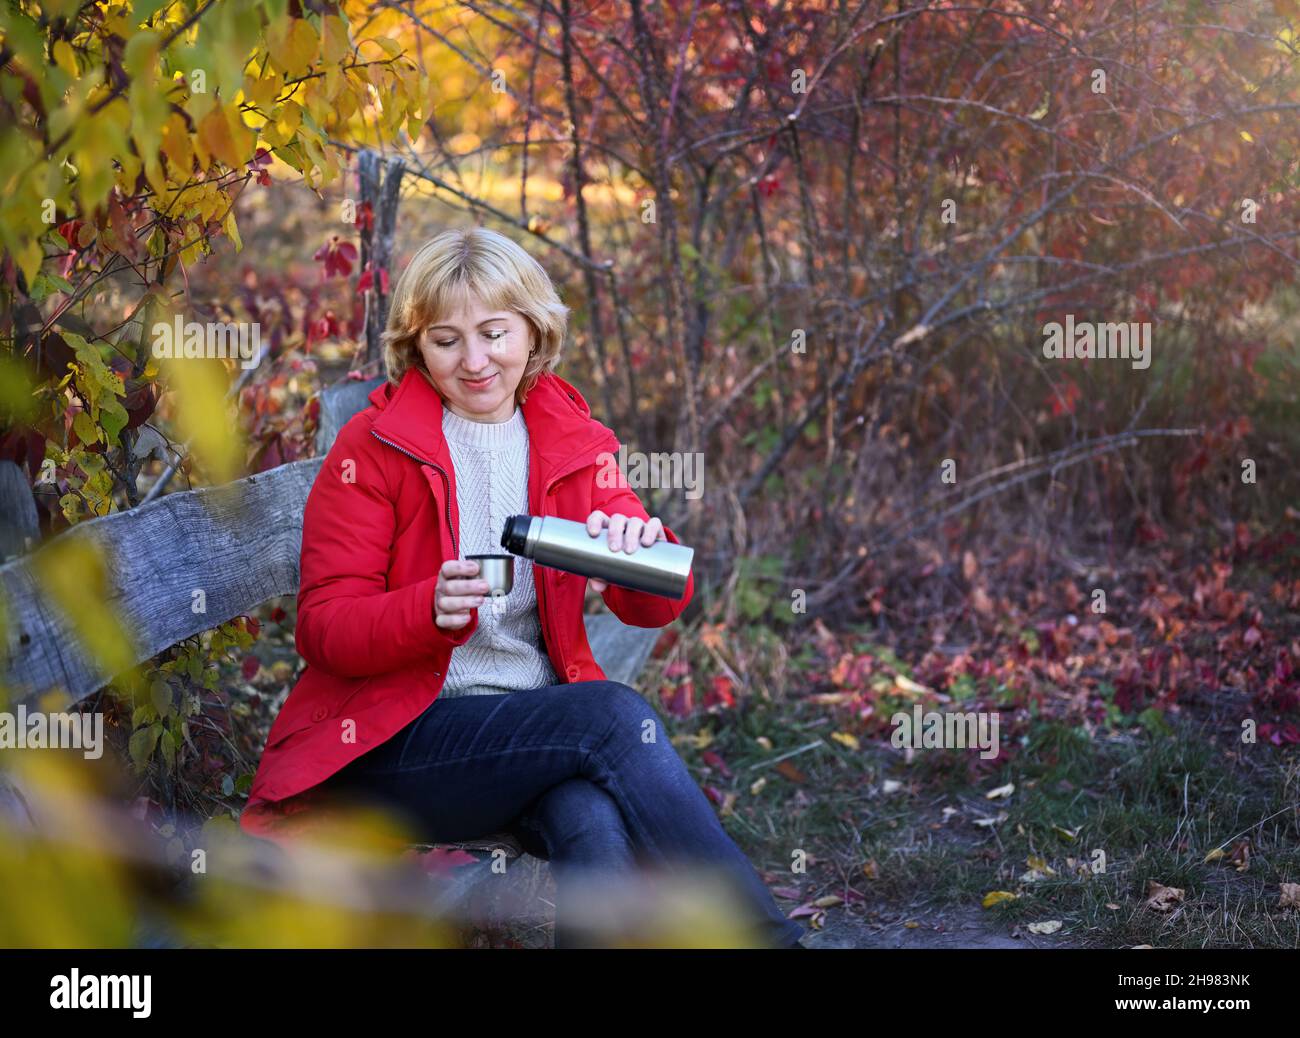 A pleasant woman of 50-60 years old in an autumn park, sitting on a wooden bench, pours tea from a thermos to keep warm. Stock Photo